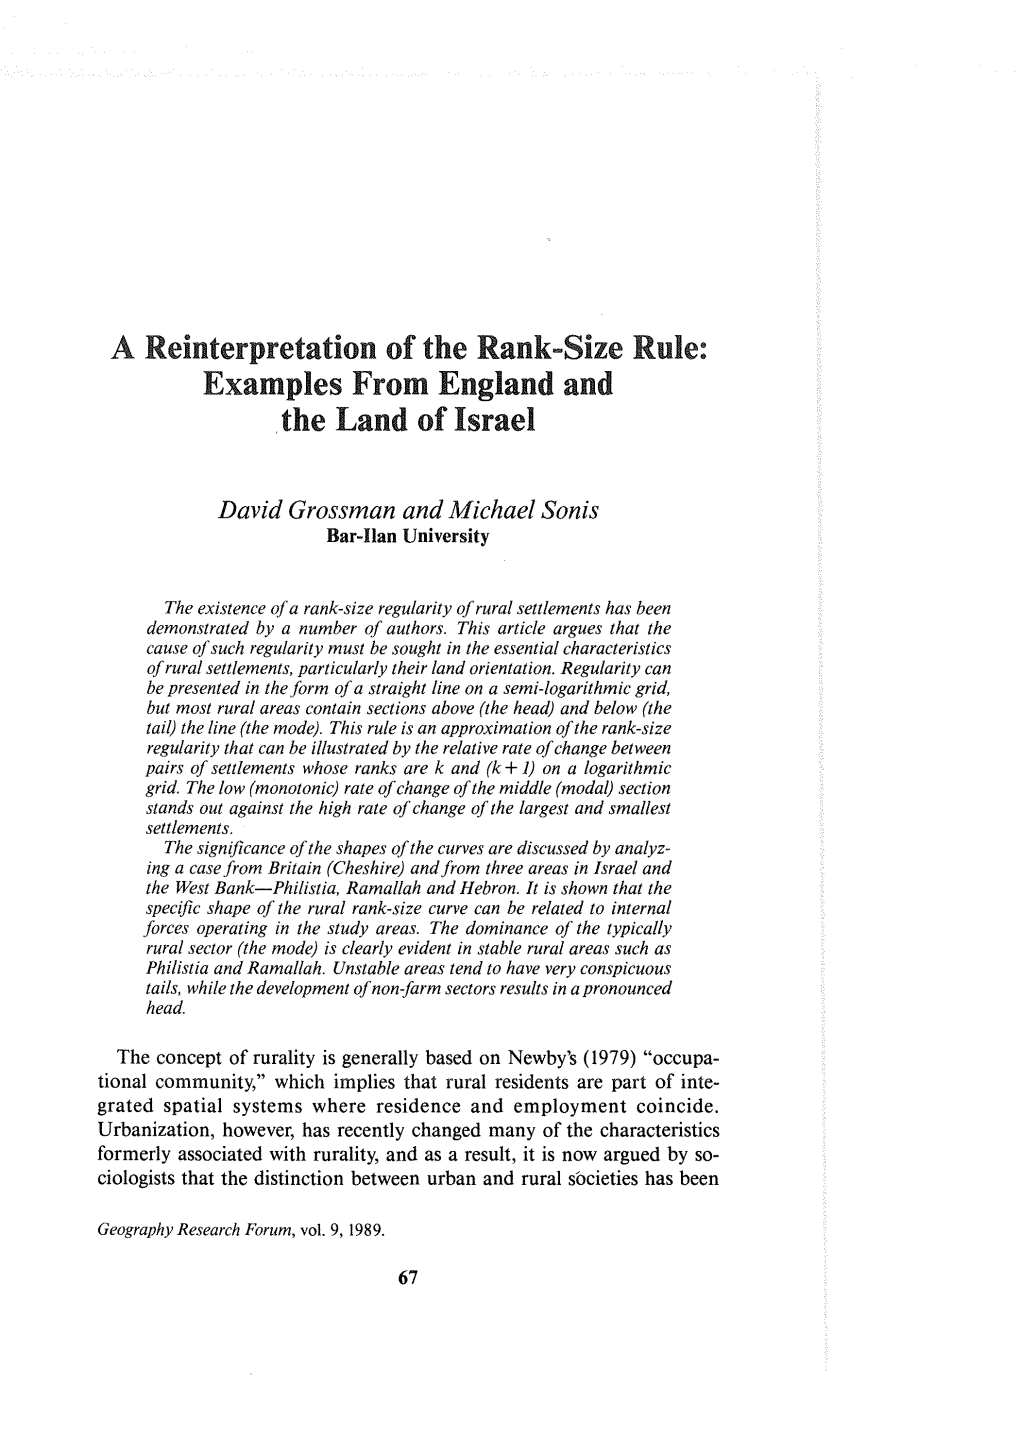 A Reinterpretation of the Rank-Size Rule: Examples from England and .The Land of Israel